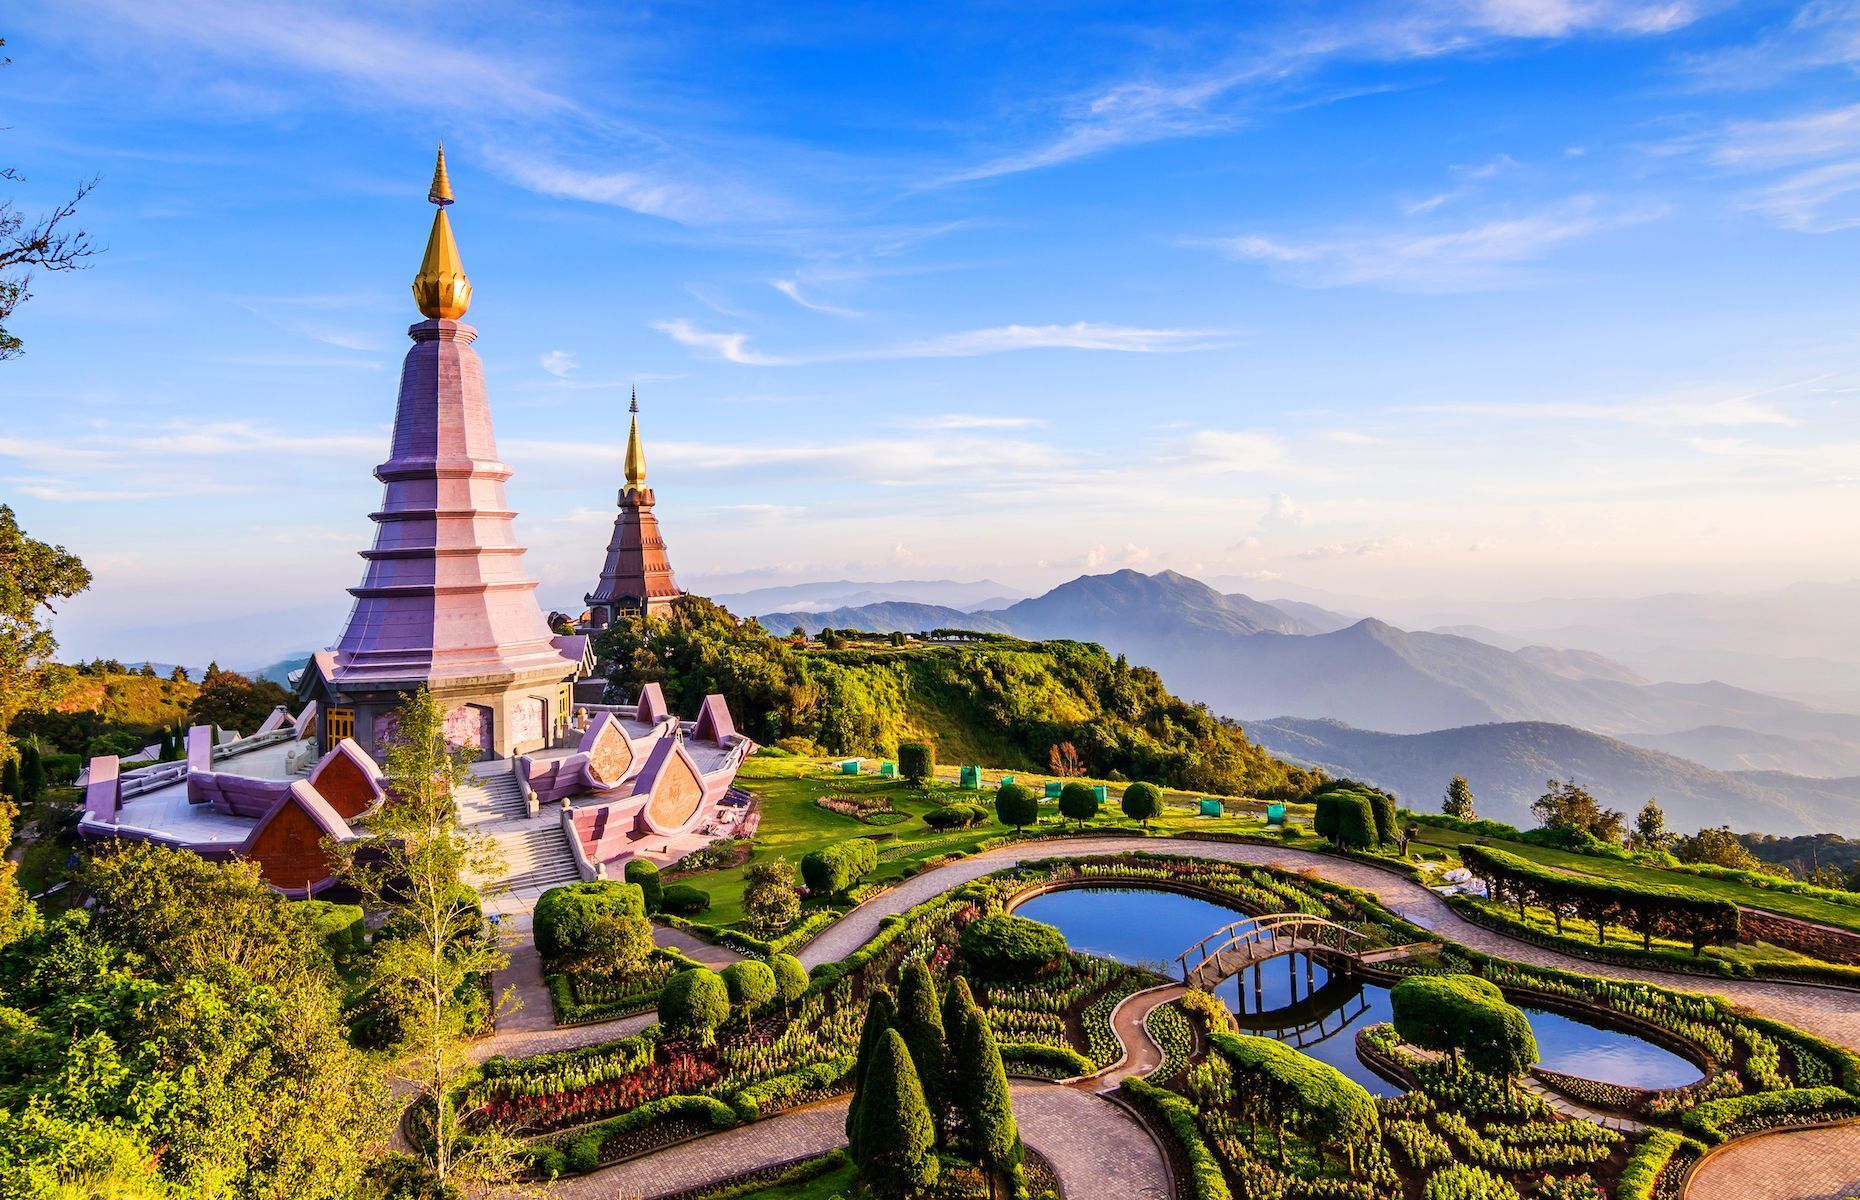 <p>In contrast to the bustling capital of Bangkok, <a href="https://www.tourismthailand.org/Destinations/Provinces/Chiang-Mai/101" class="atom_link atom_valid" rel="noreferrer noopener">Chiang Mai</a> is an enchanting city found in the country’s northern region and ideal for travellers to Thailand looking for a little peace and quiet. You’ll find hundreds of magnificent temples, including Wat Phra Singh and the mountain-top Wat Phra That Doi Suthep offering phenomenal panoramic views. Trekking to the top of <a href="https://www.thainationalparks.com/doi-inthanon-national-park" class="atom_link atom_valid" rel="noreferrer noopener">Doi Inthanon National Park</a> and strolling through an old canal-lined village are two more must-do activities to add to your itinerary.</p>